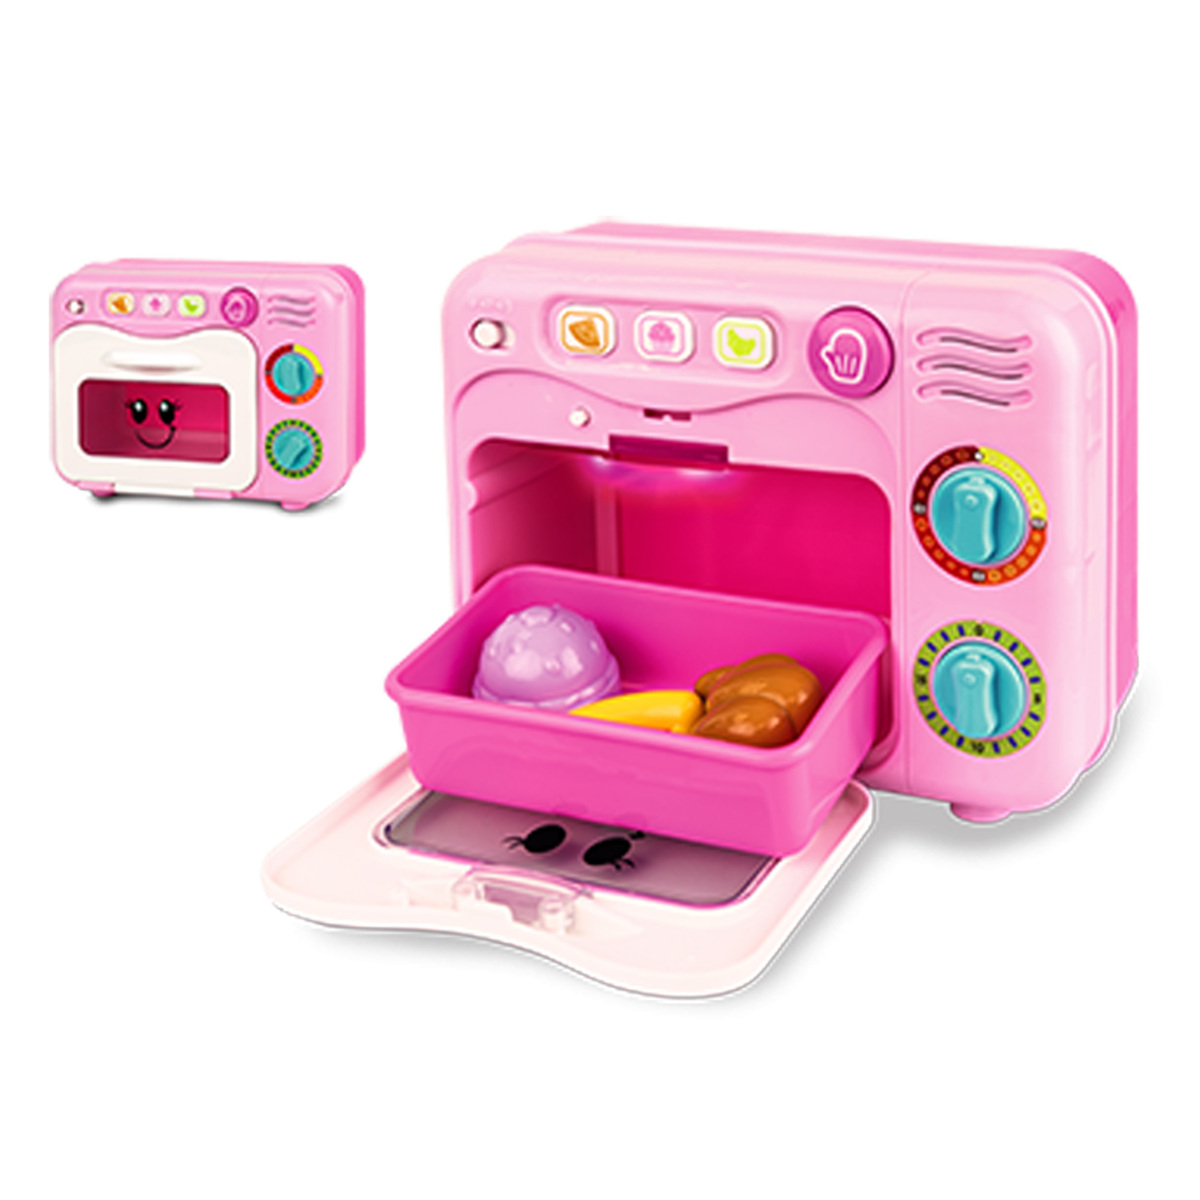 Winfun Bake 'N Learn Toaster Oven Girl, Multicolor, 0761G-01